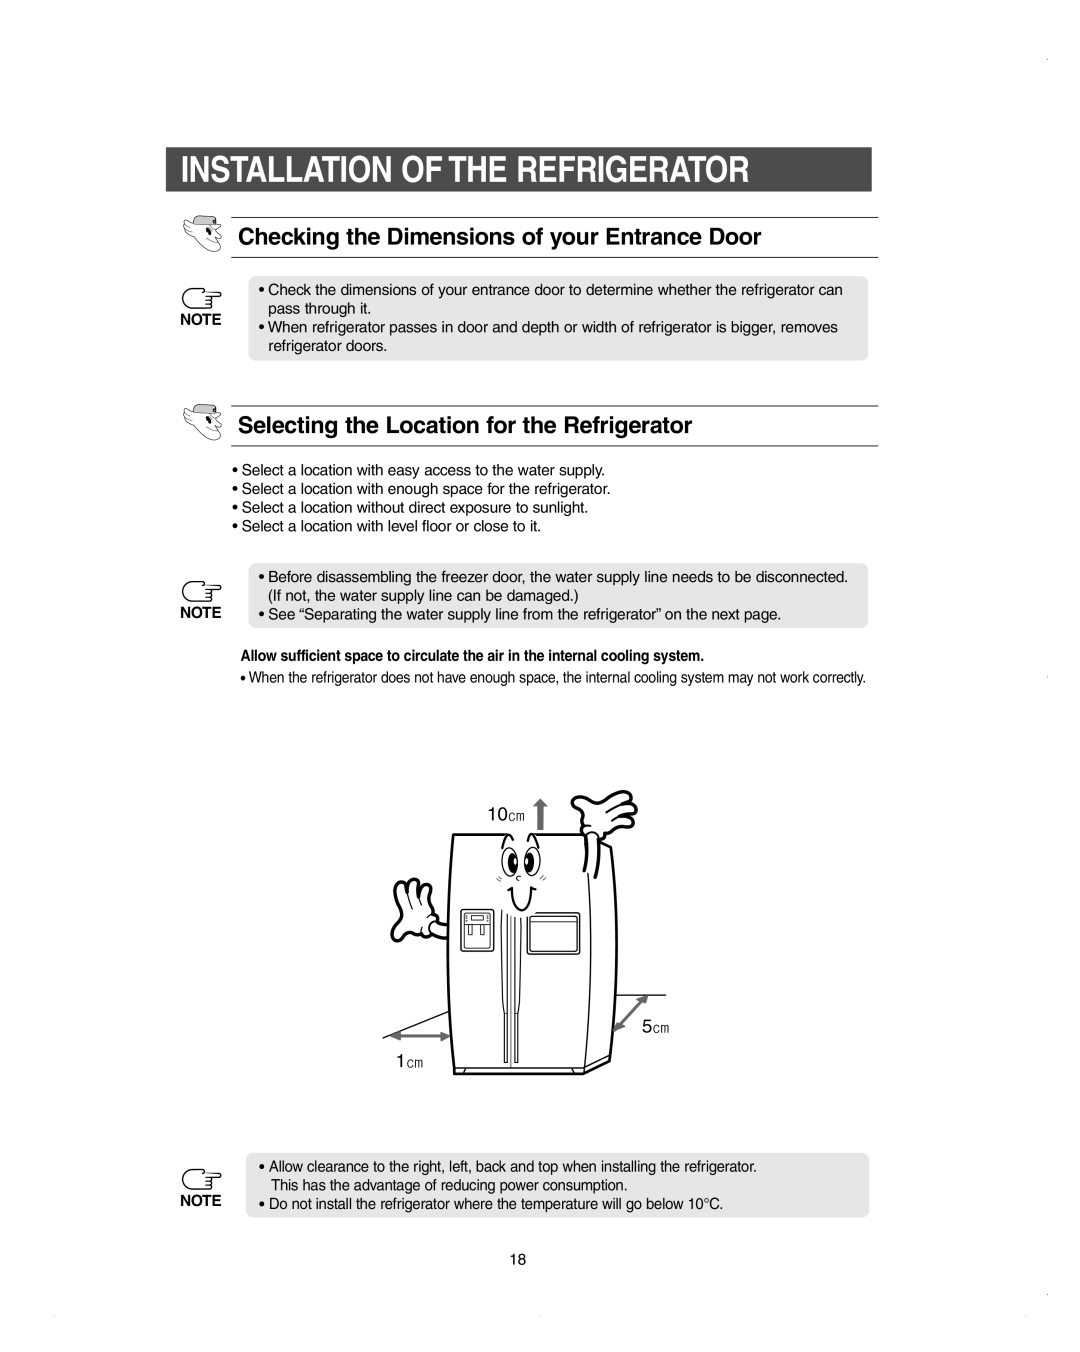 Samsung DA99-01278C owner manual Installation Of The Refrigerator, Checking the Dimensions of your Entrance Door 